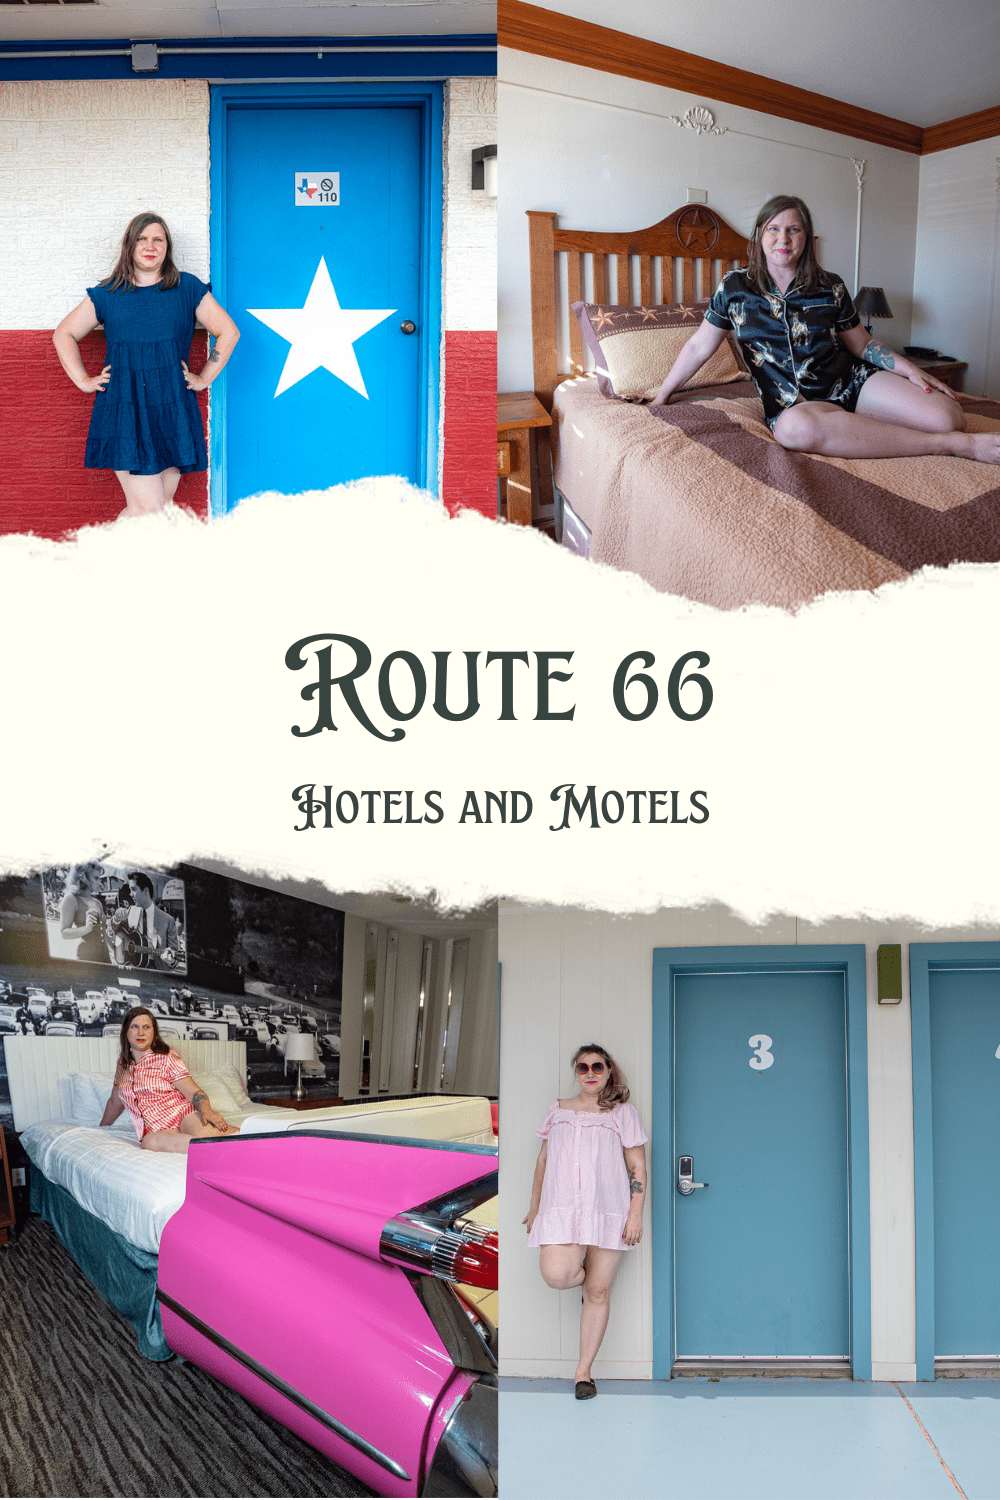 Whether your Route 66 road trip takes you a few days, a few weeks, or even a few months, you're definitely going to need to find a few hotels along Route 66 to rest up in. If you want to experience the real magic of the Mother Road you should look for some of the most iconic and historic Route 66 hotels and motels that are still operating today. #Route66 #Route66RoadTrip #Route66Hotels #Hotel #Motel